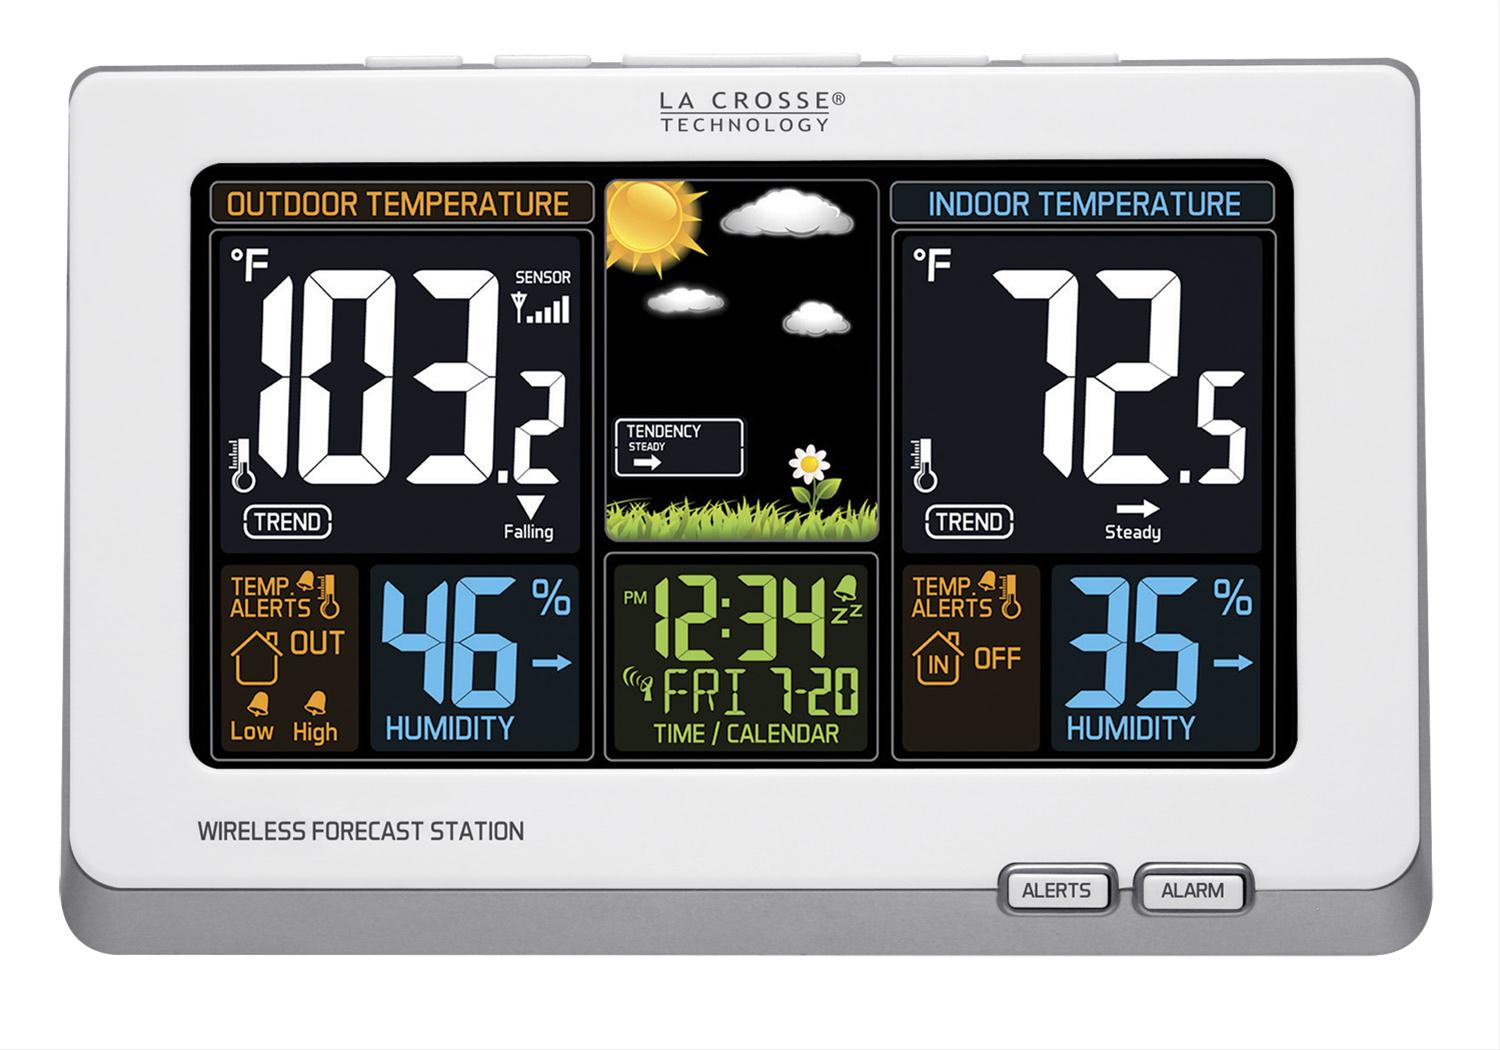 New ! La Crosse Technology Wireless Weather Station with Atomic Time & Date